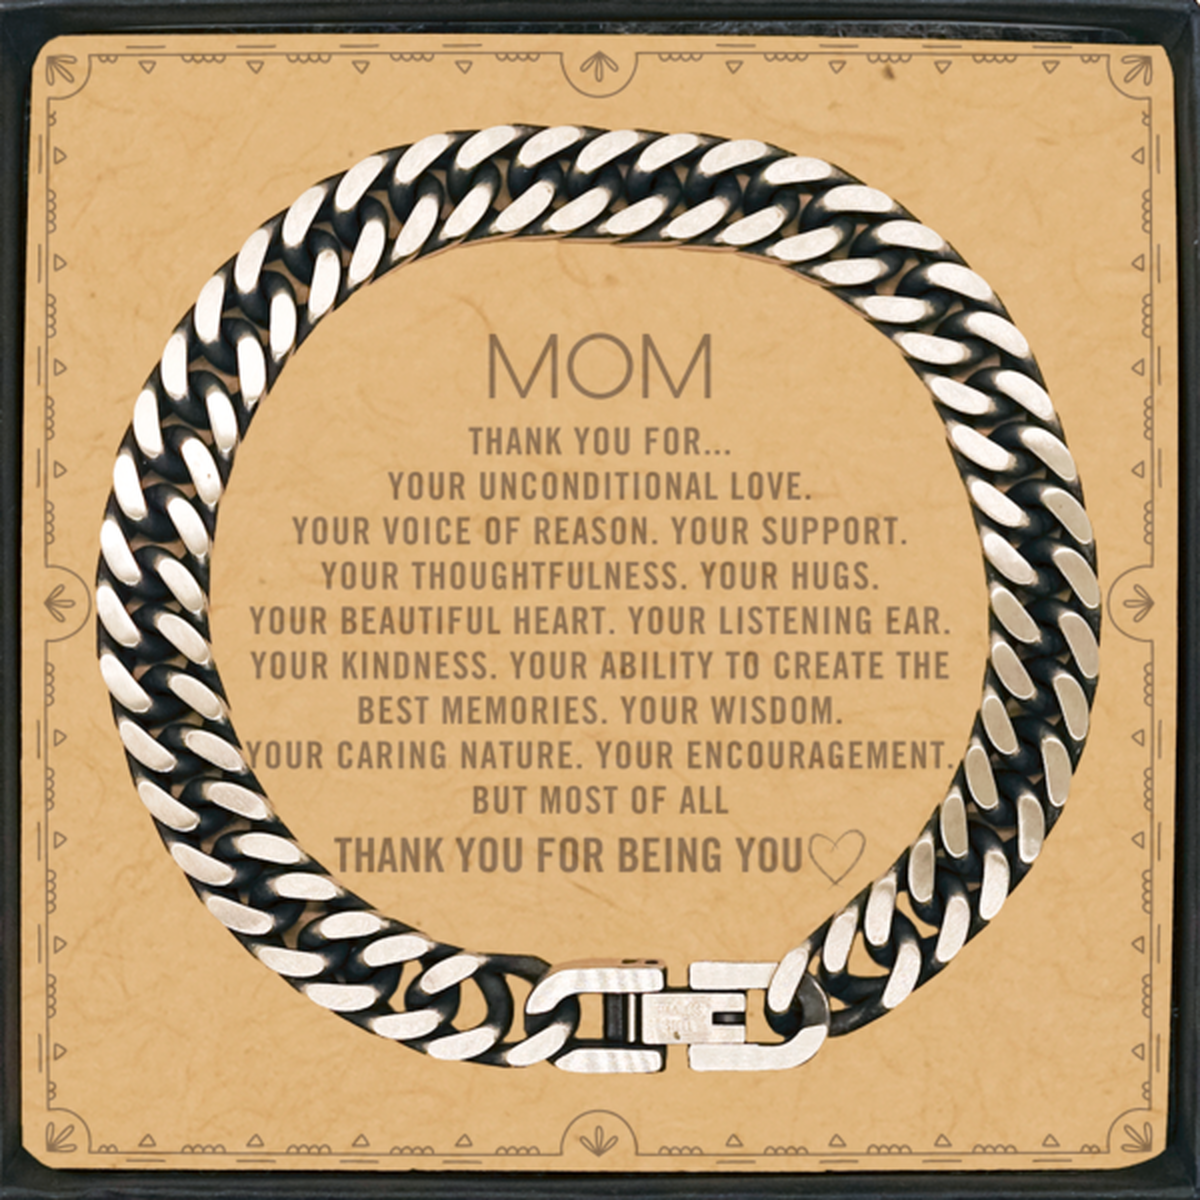 Mom Cuban Link Chain Bracelet Custom, Message Card Gifts For Mom Christmas Graduation Birthday Gifts for Men Women Mom Thank you for Your unconditional love